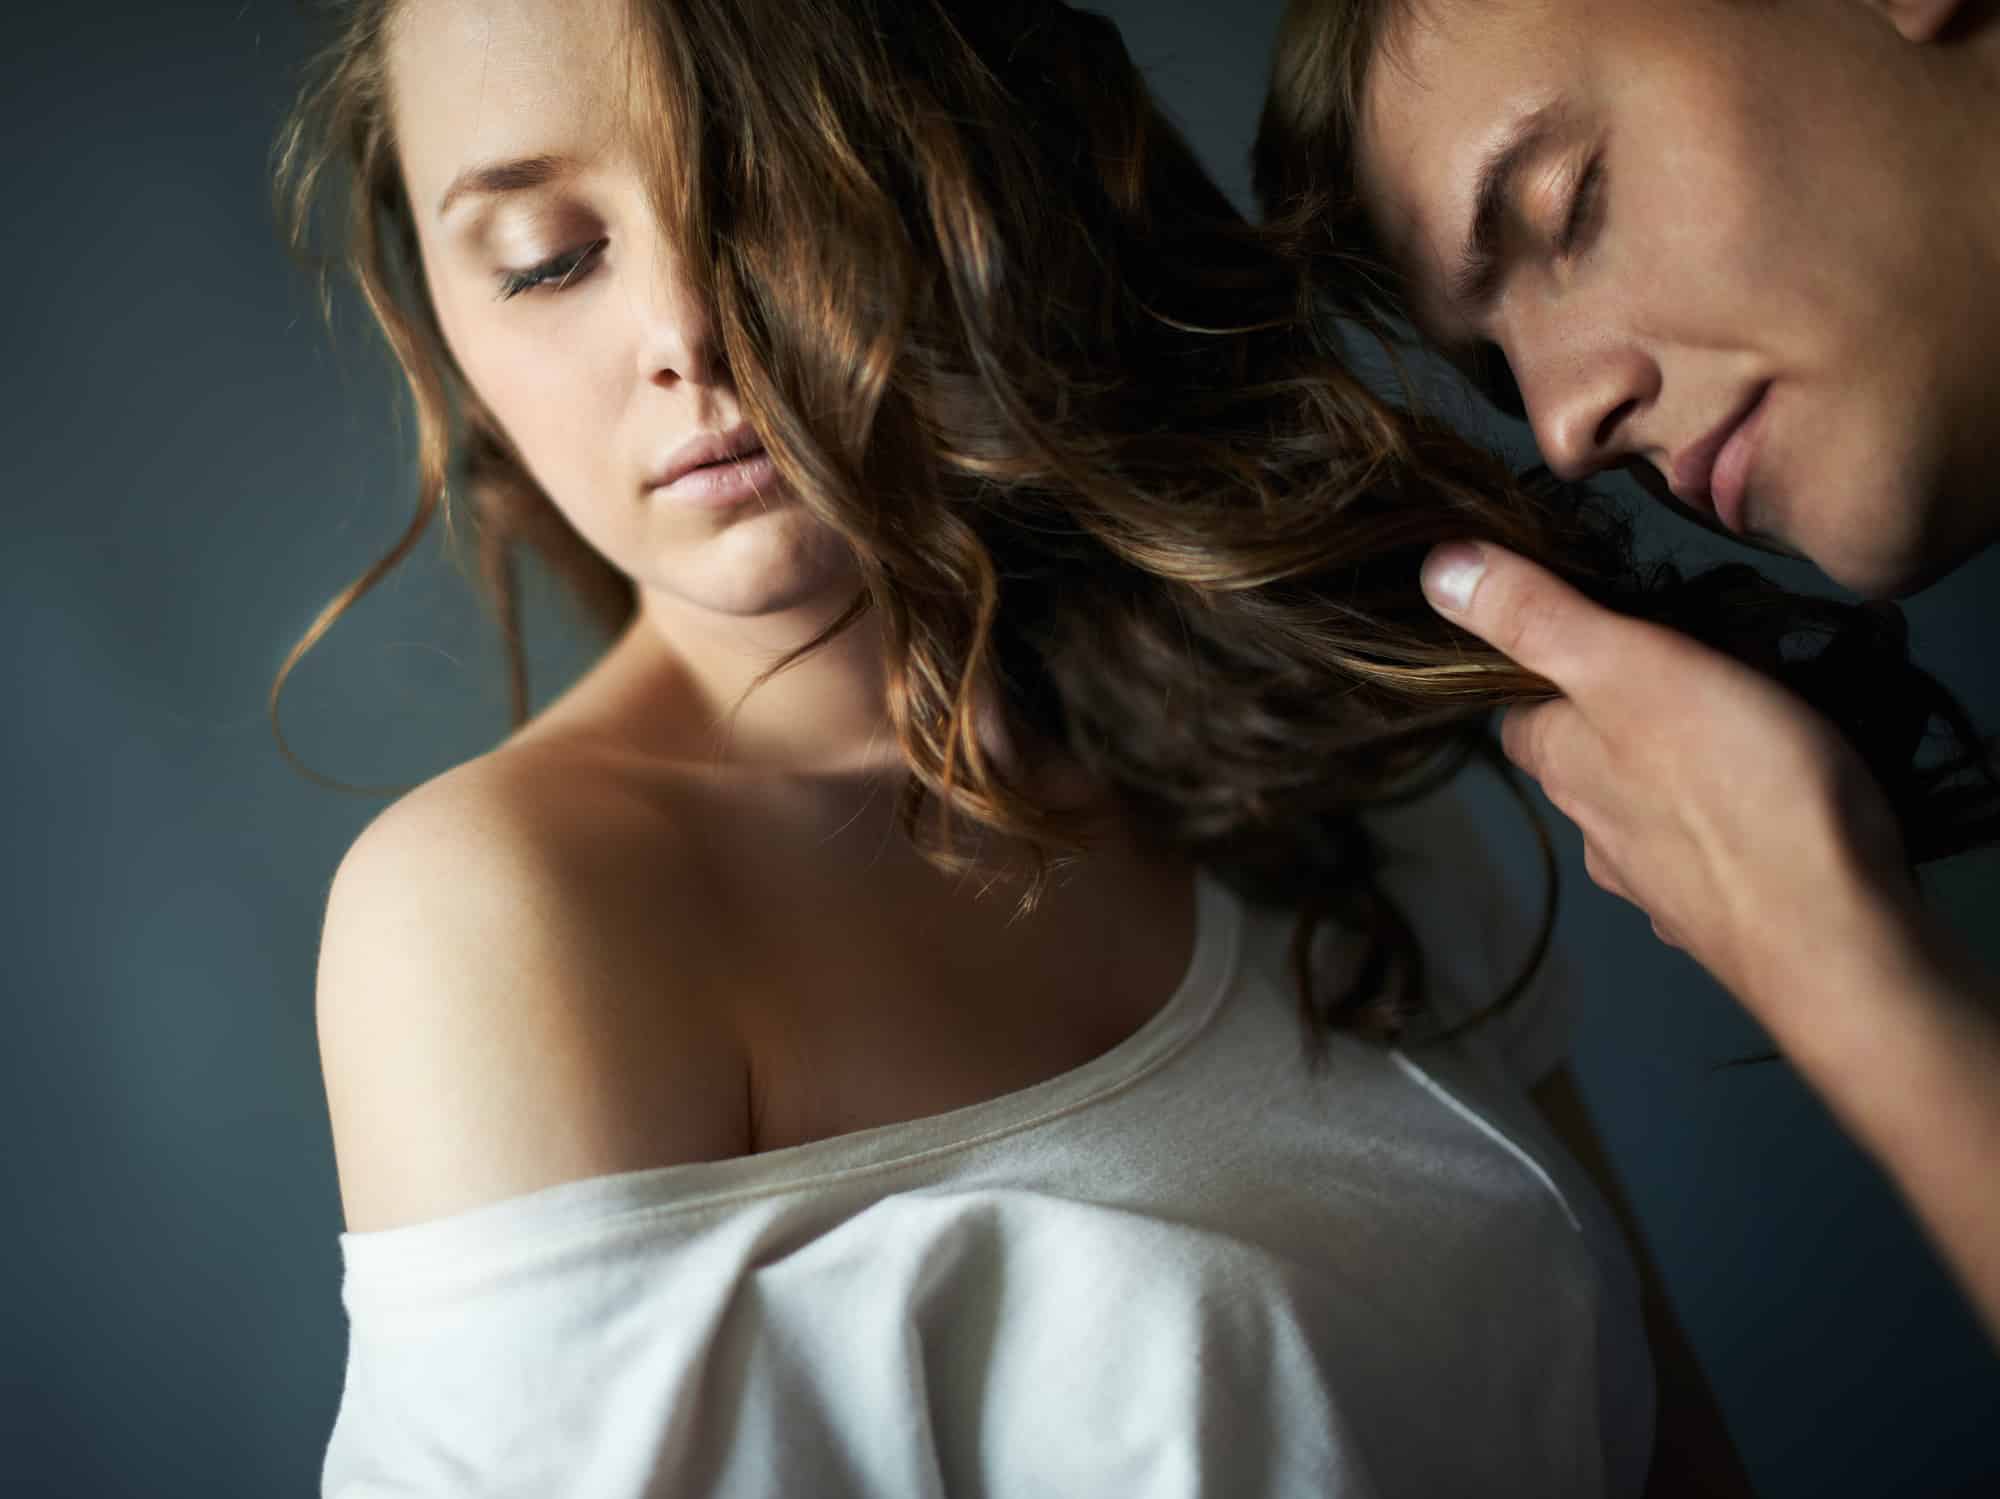 When A Guy Plays With Your Hair (9 Possible Things It Could Mean) - Her Norm